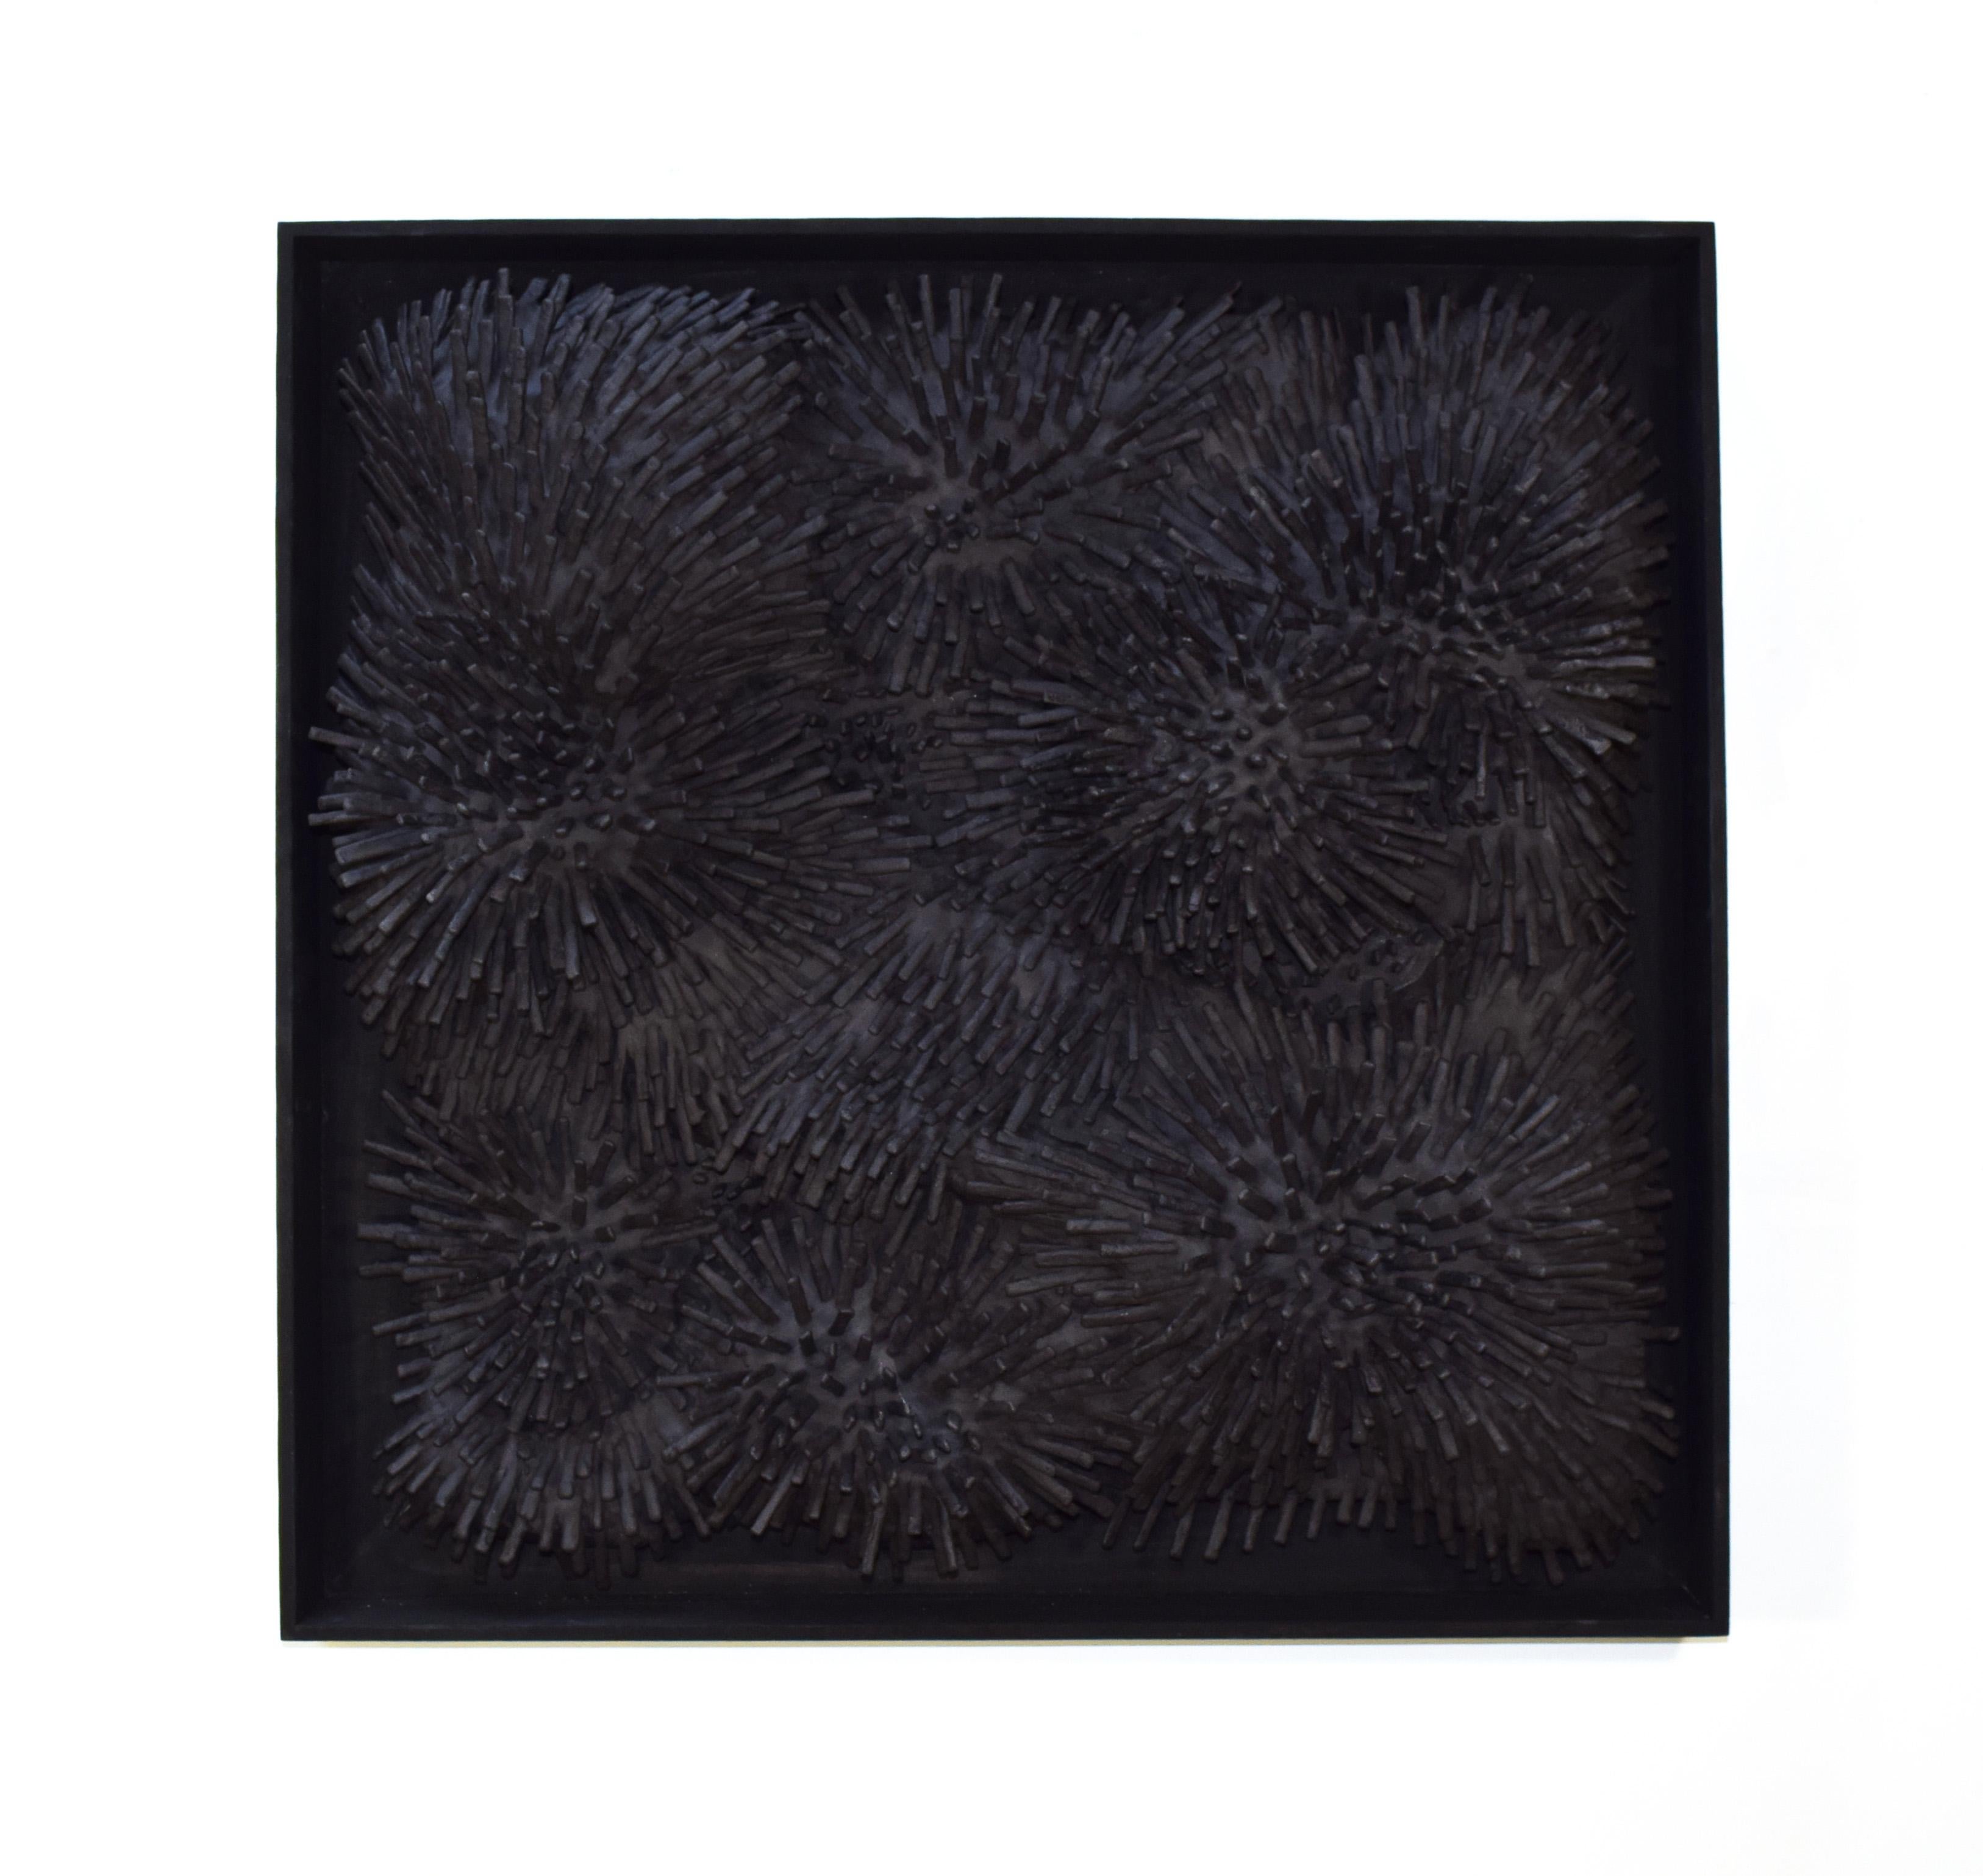 Black Burst - 3D organic feel contemporary abstract mural sculpture in foam - Mixed Media Art by Erin Vincent